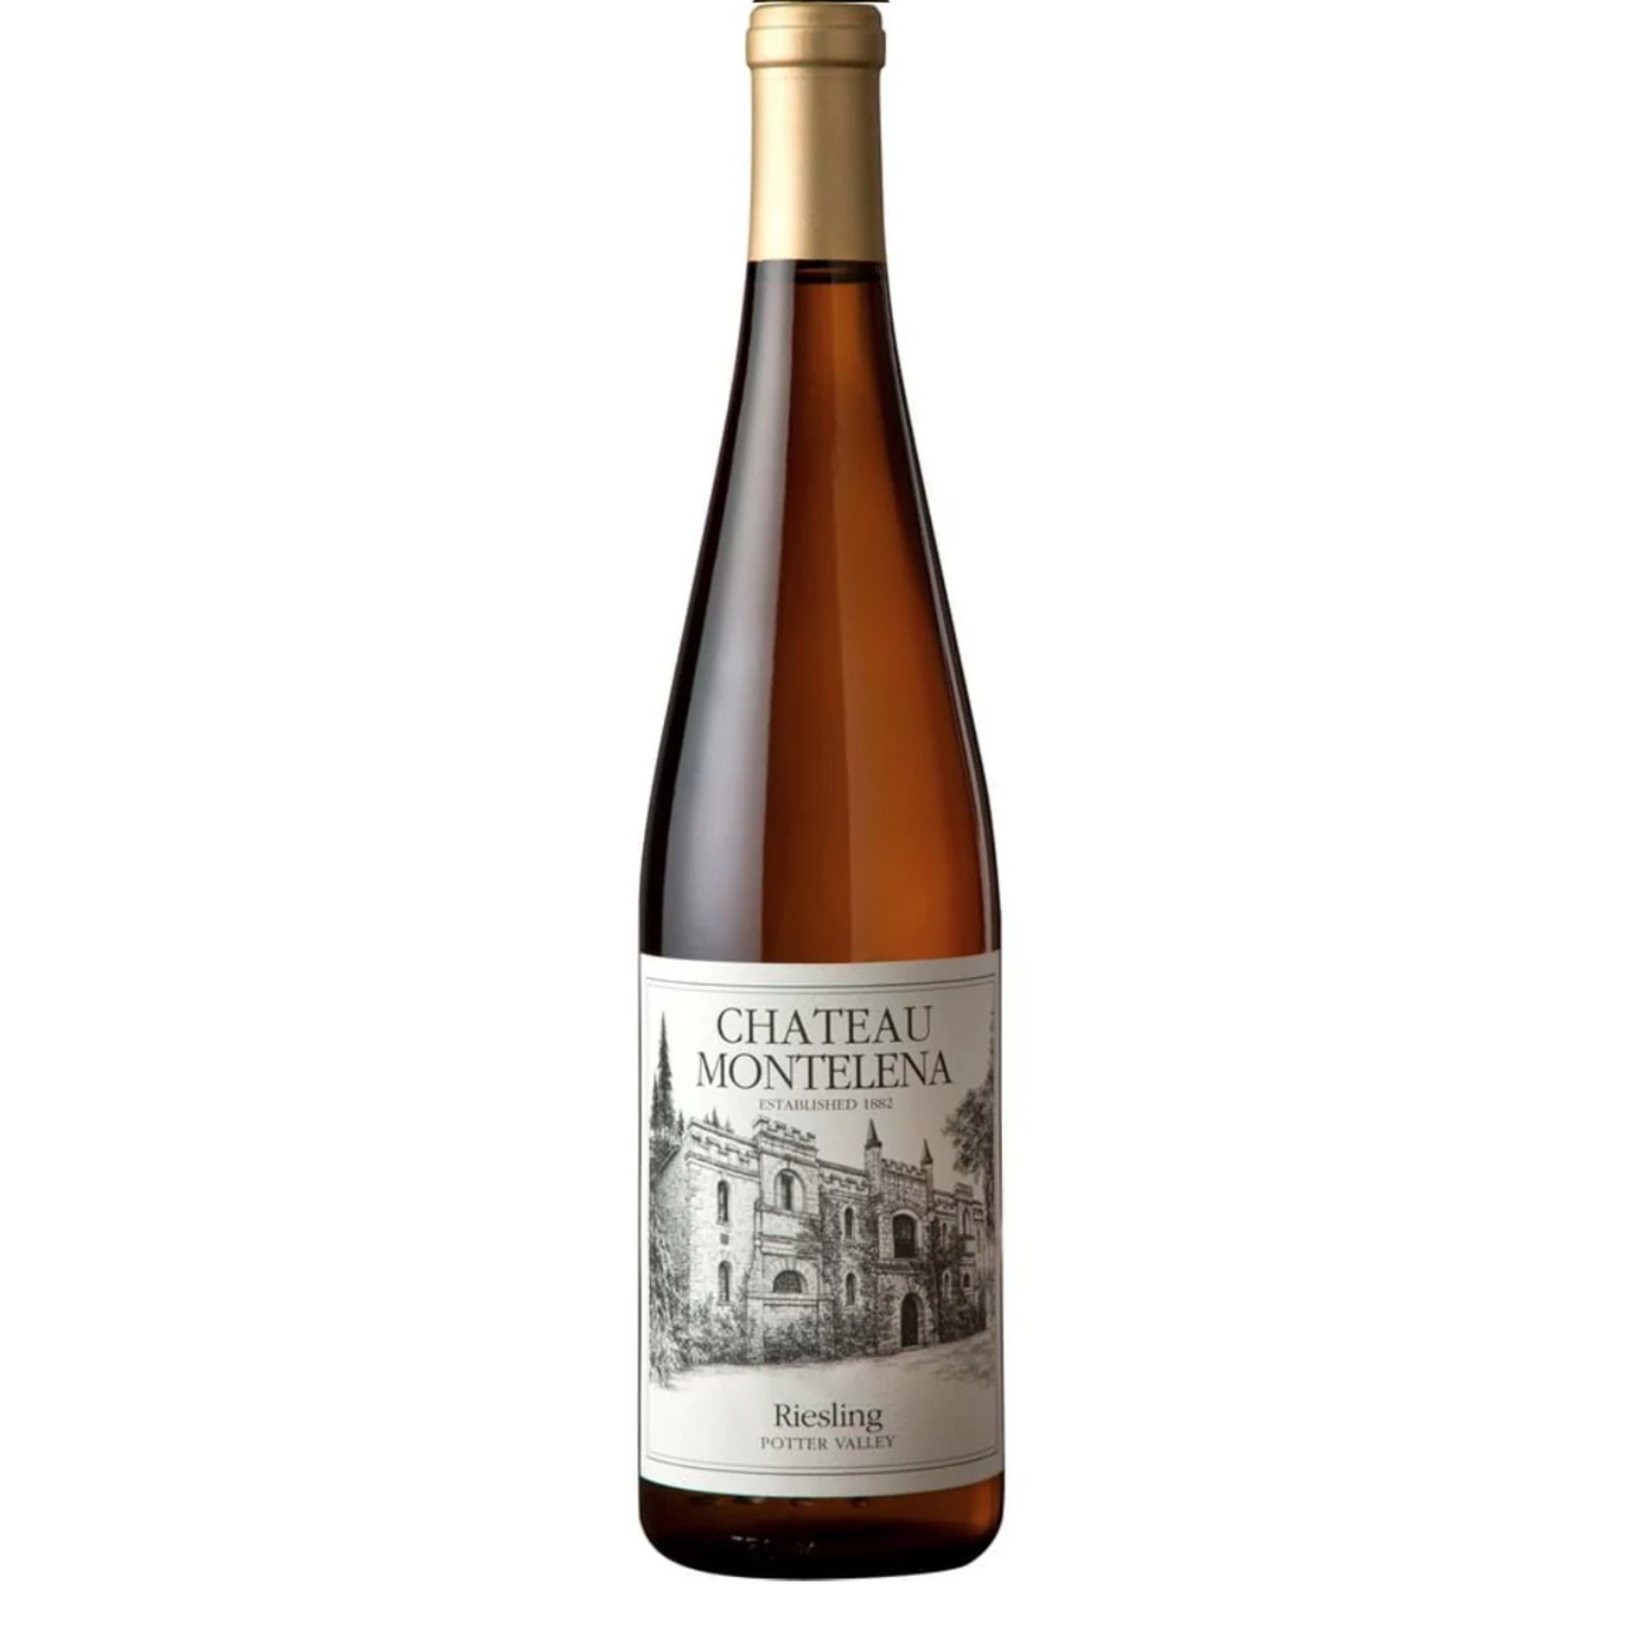 2019, Chateau Montelena, Riesling, Potter Valley, Mendocino County, California, 13.4% Alc, CTnr, A4,Sw3,Sm3,C3,I3